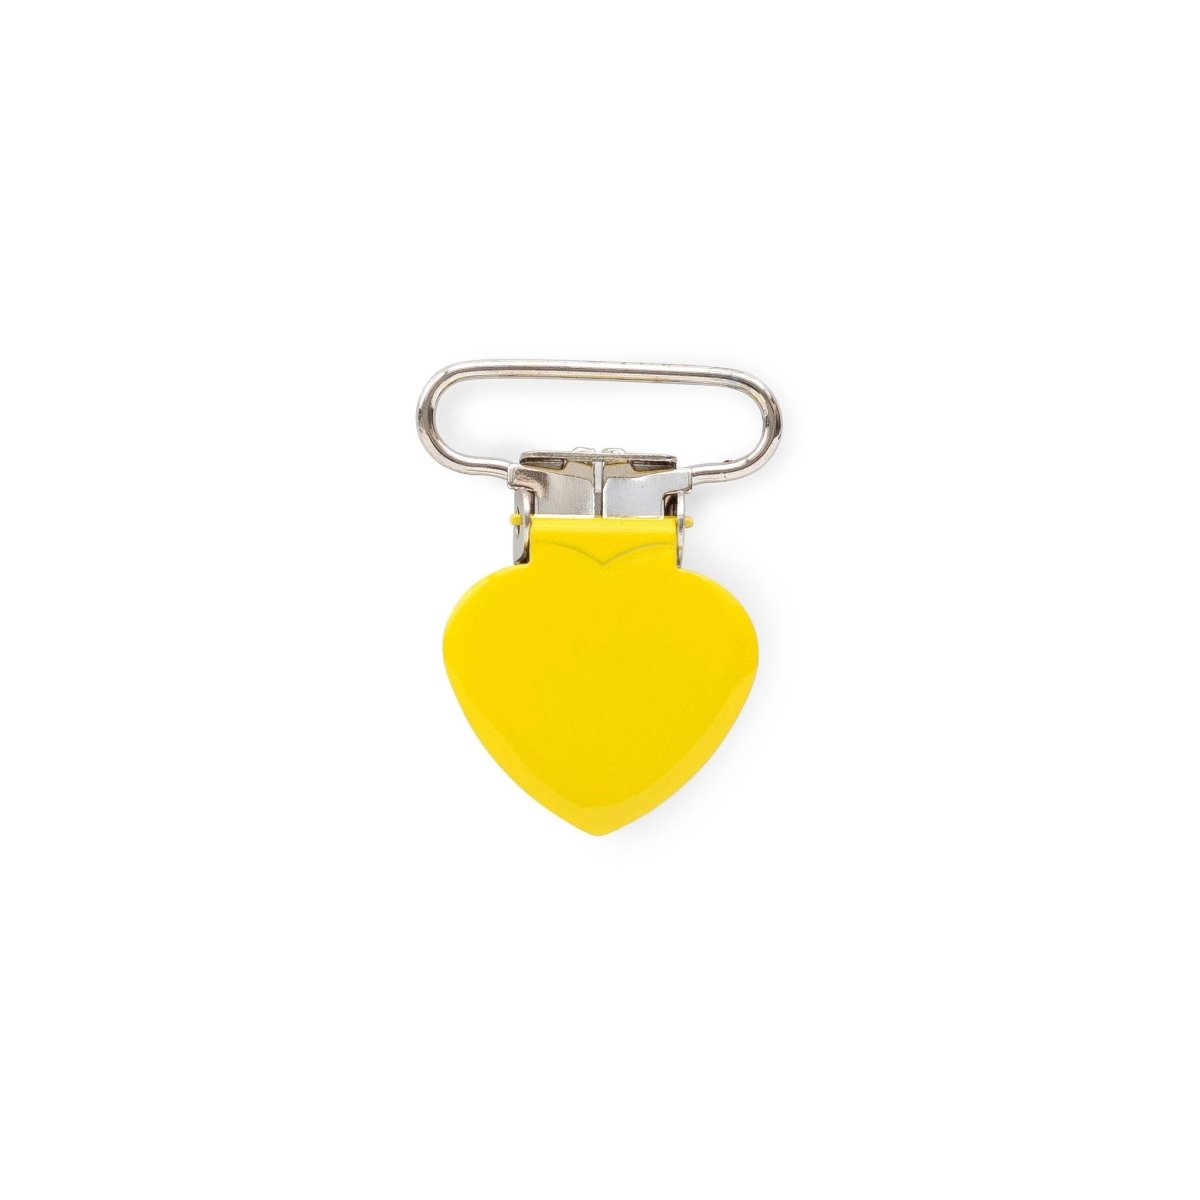 Clips Metal Hearts Sunshine Yellow from Cara & Co Craft Supply